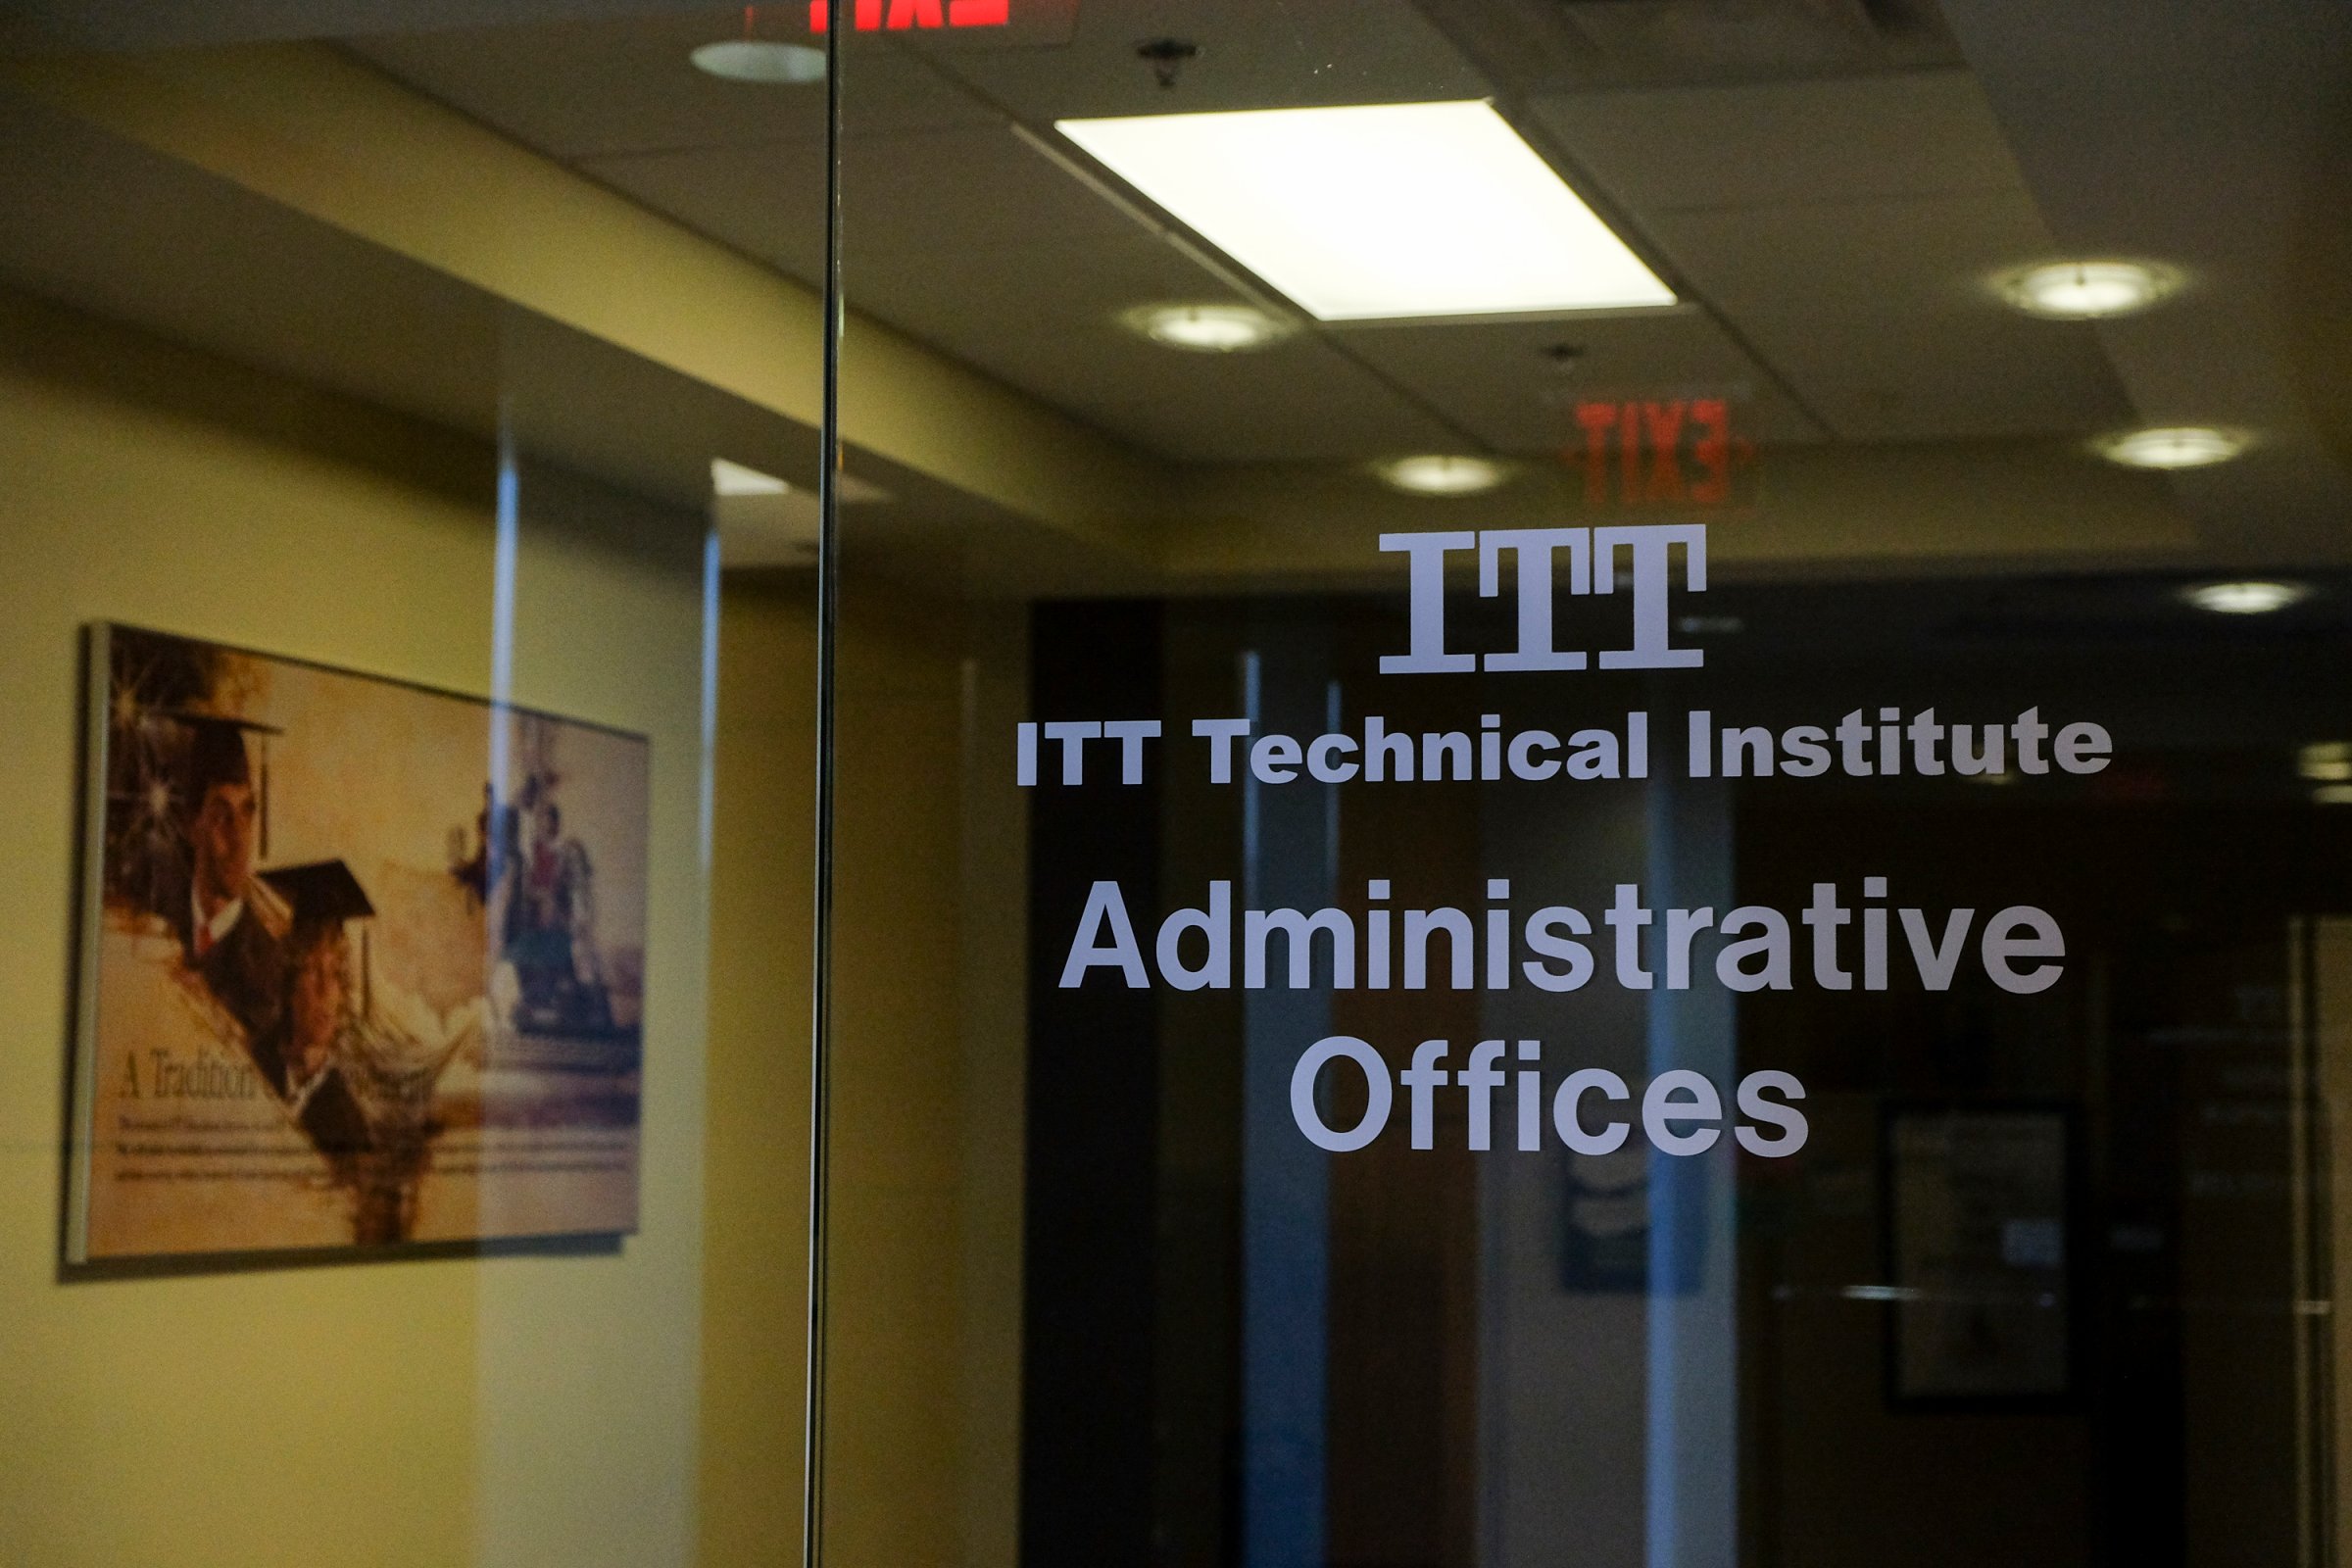 The Chantilly Campus of ITT Technical Institute sits closed and empty on Sept. 6, 2016.